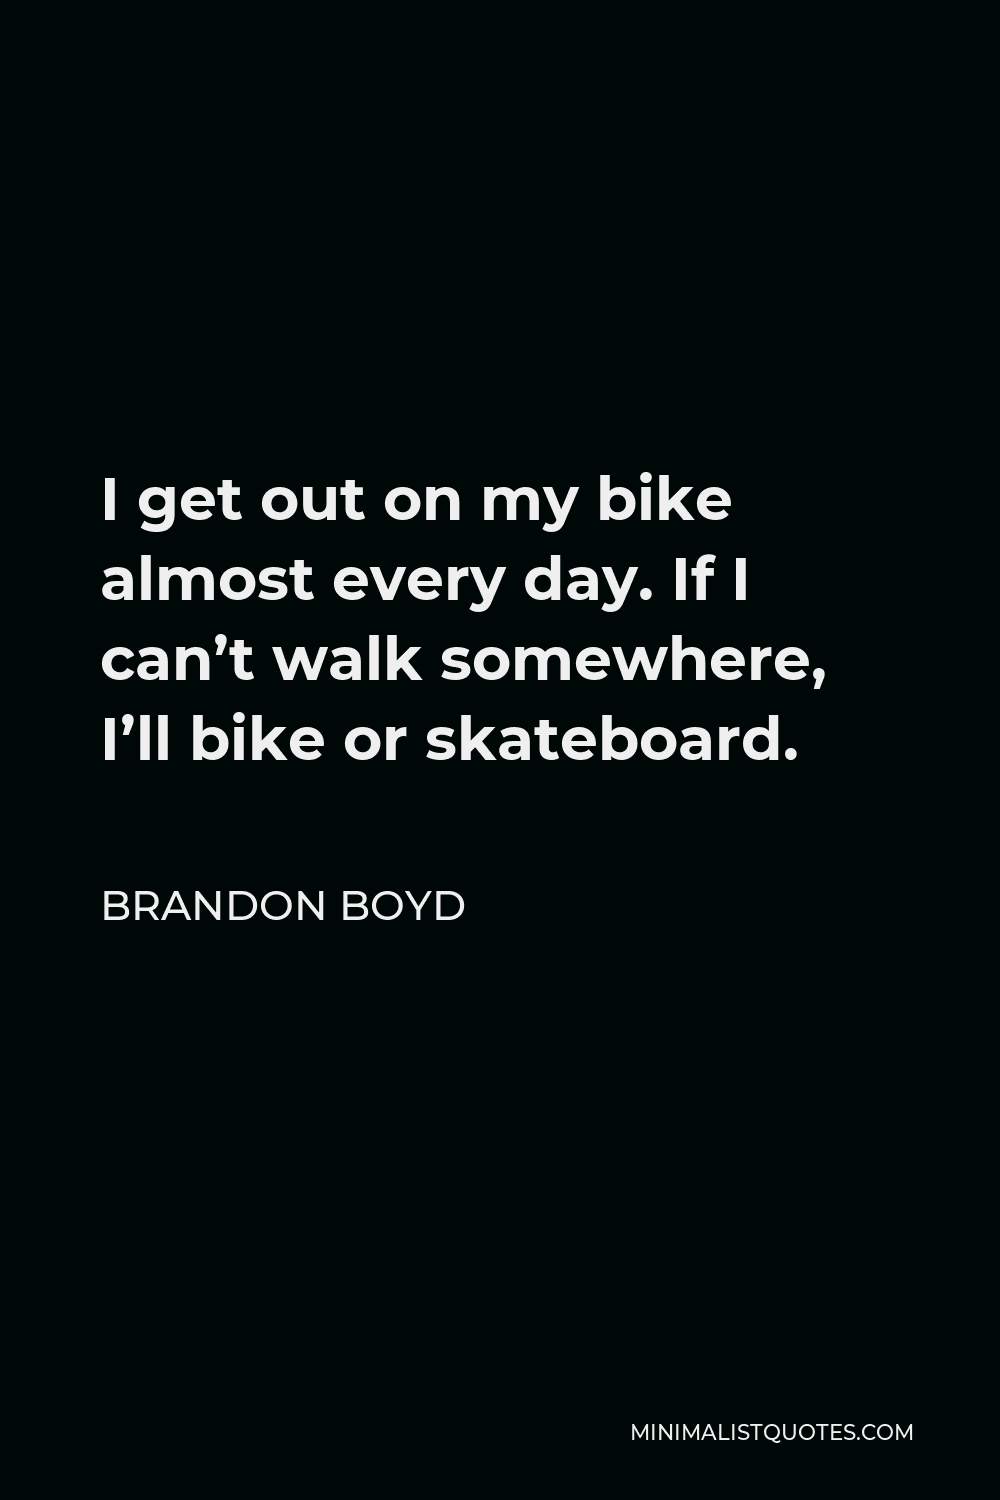 Brandon Boyd Quote - I get out on my bike almost every day. If I can’t walk somewhere, I’ll bike or skateboard.